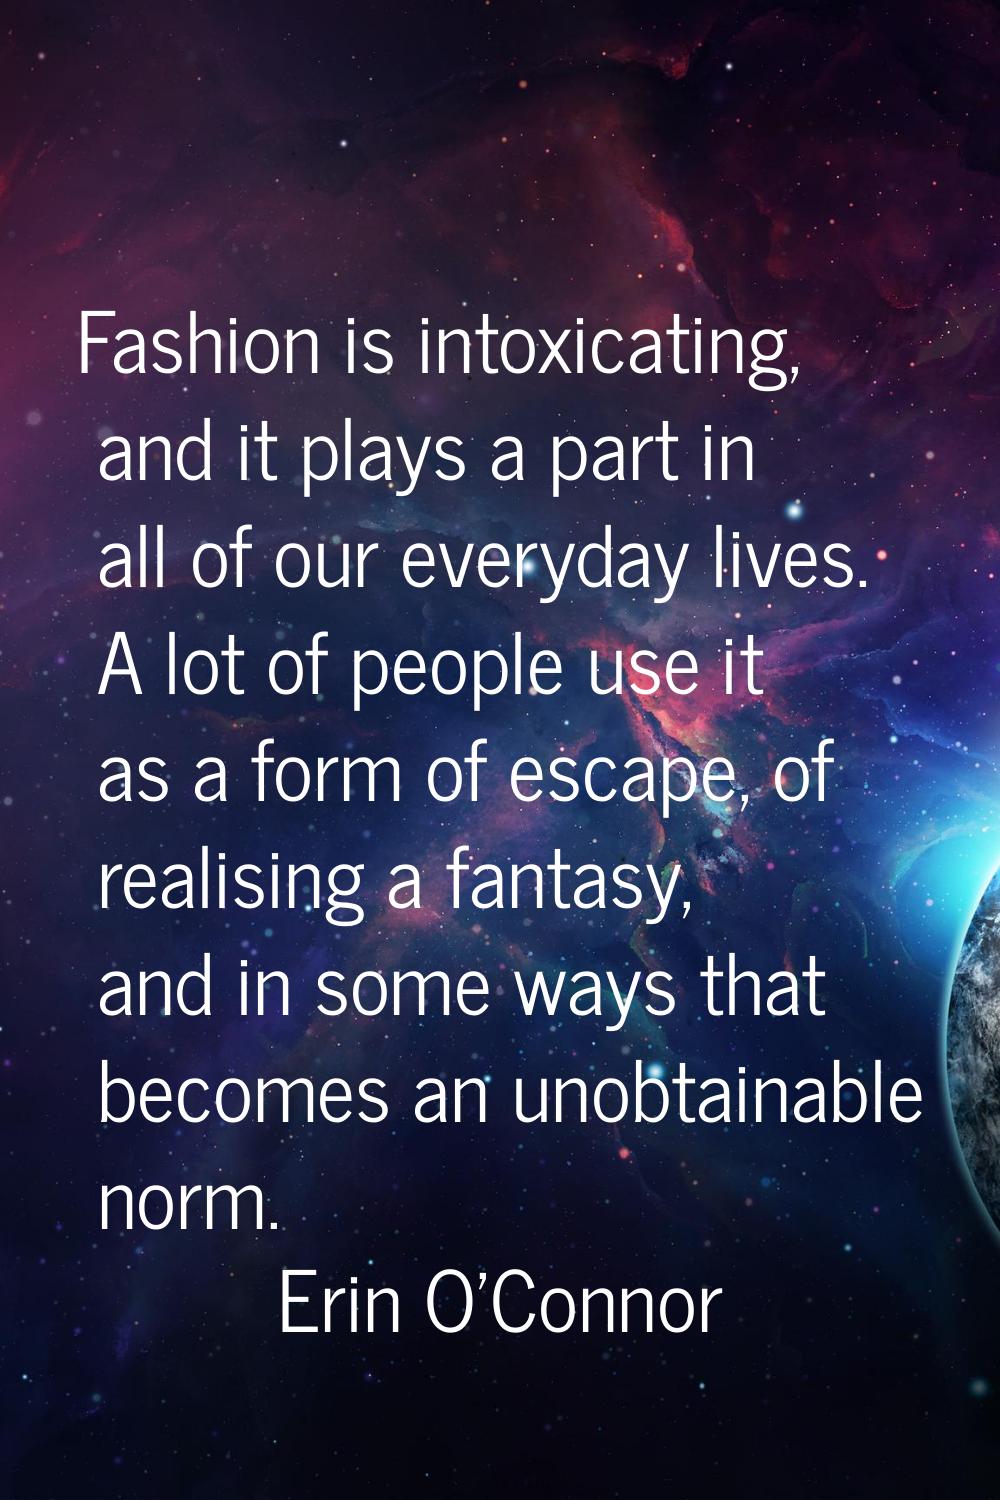 Fashion is intoxicating, and it plays a part in all of our everyday lives. A lot of people use it a